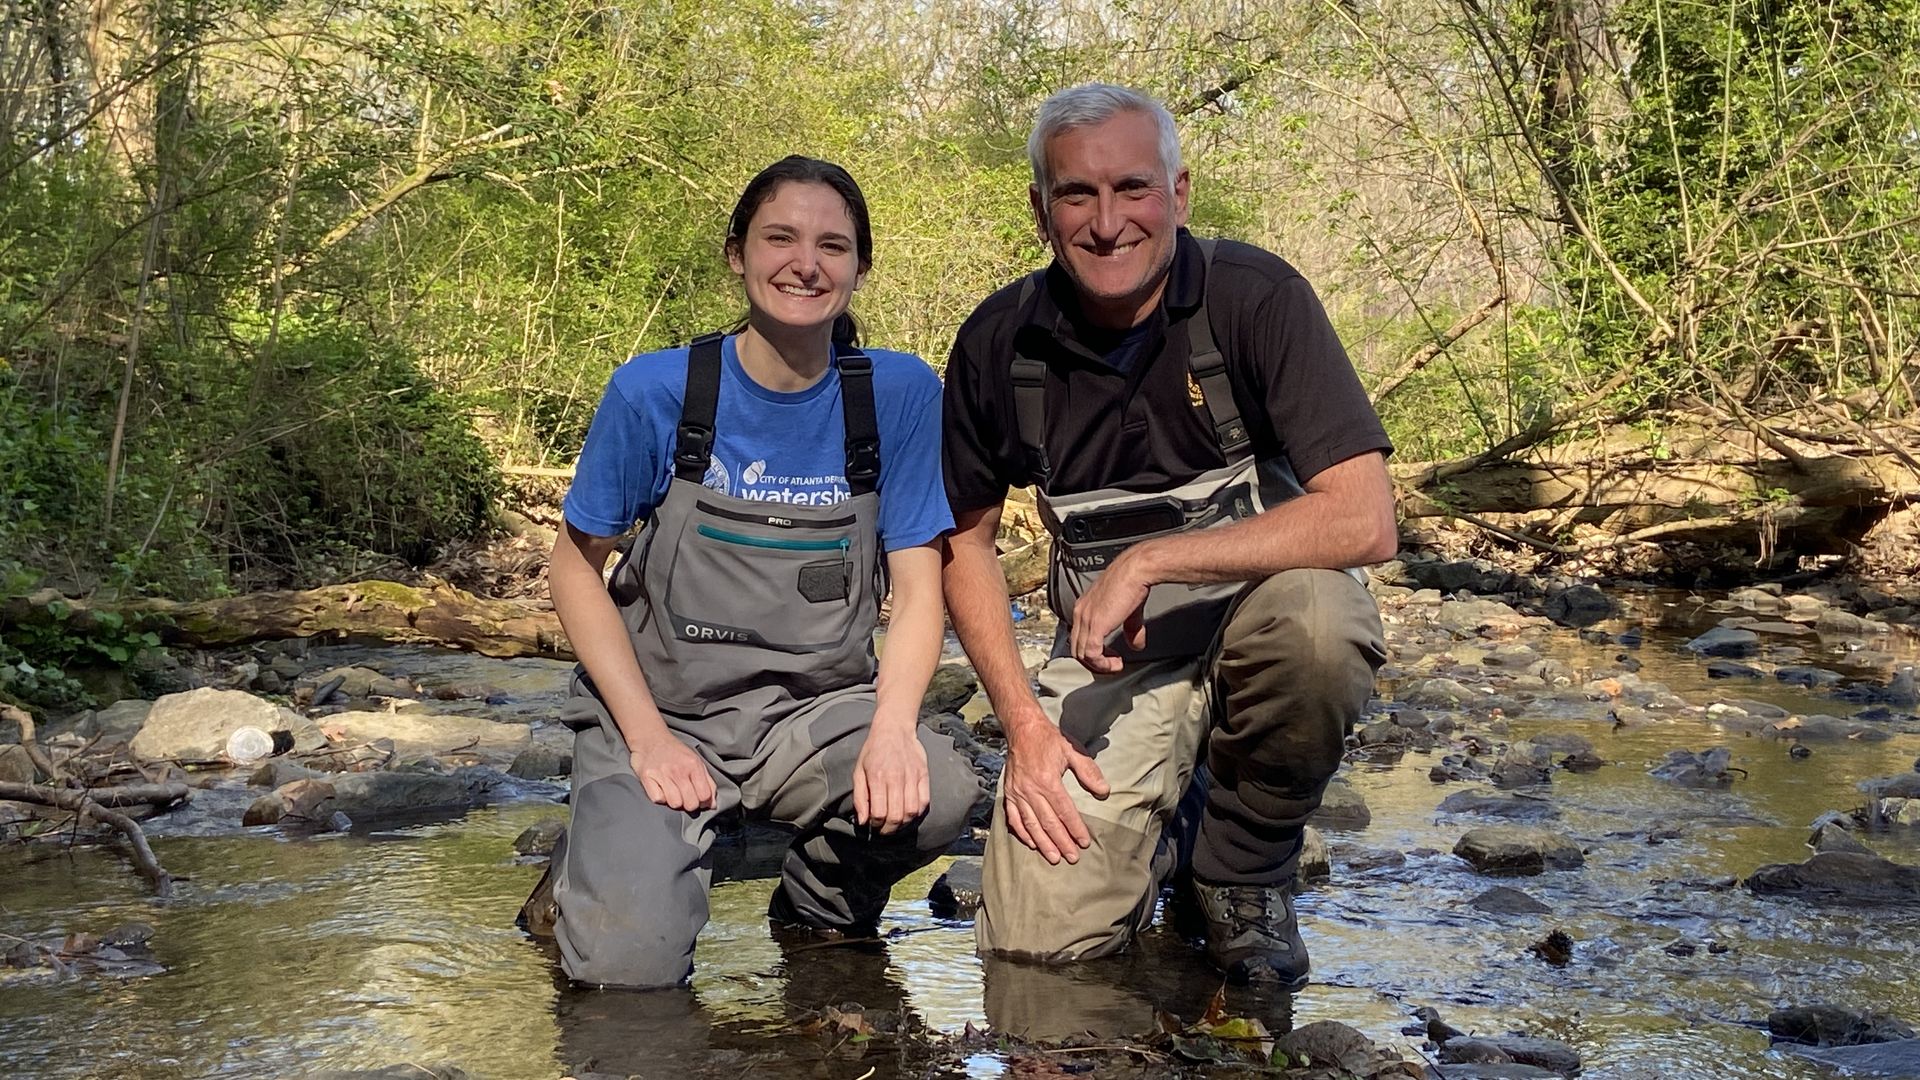 Two people wearing waders take a knee in a stream in the woods